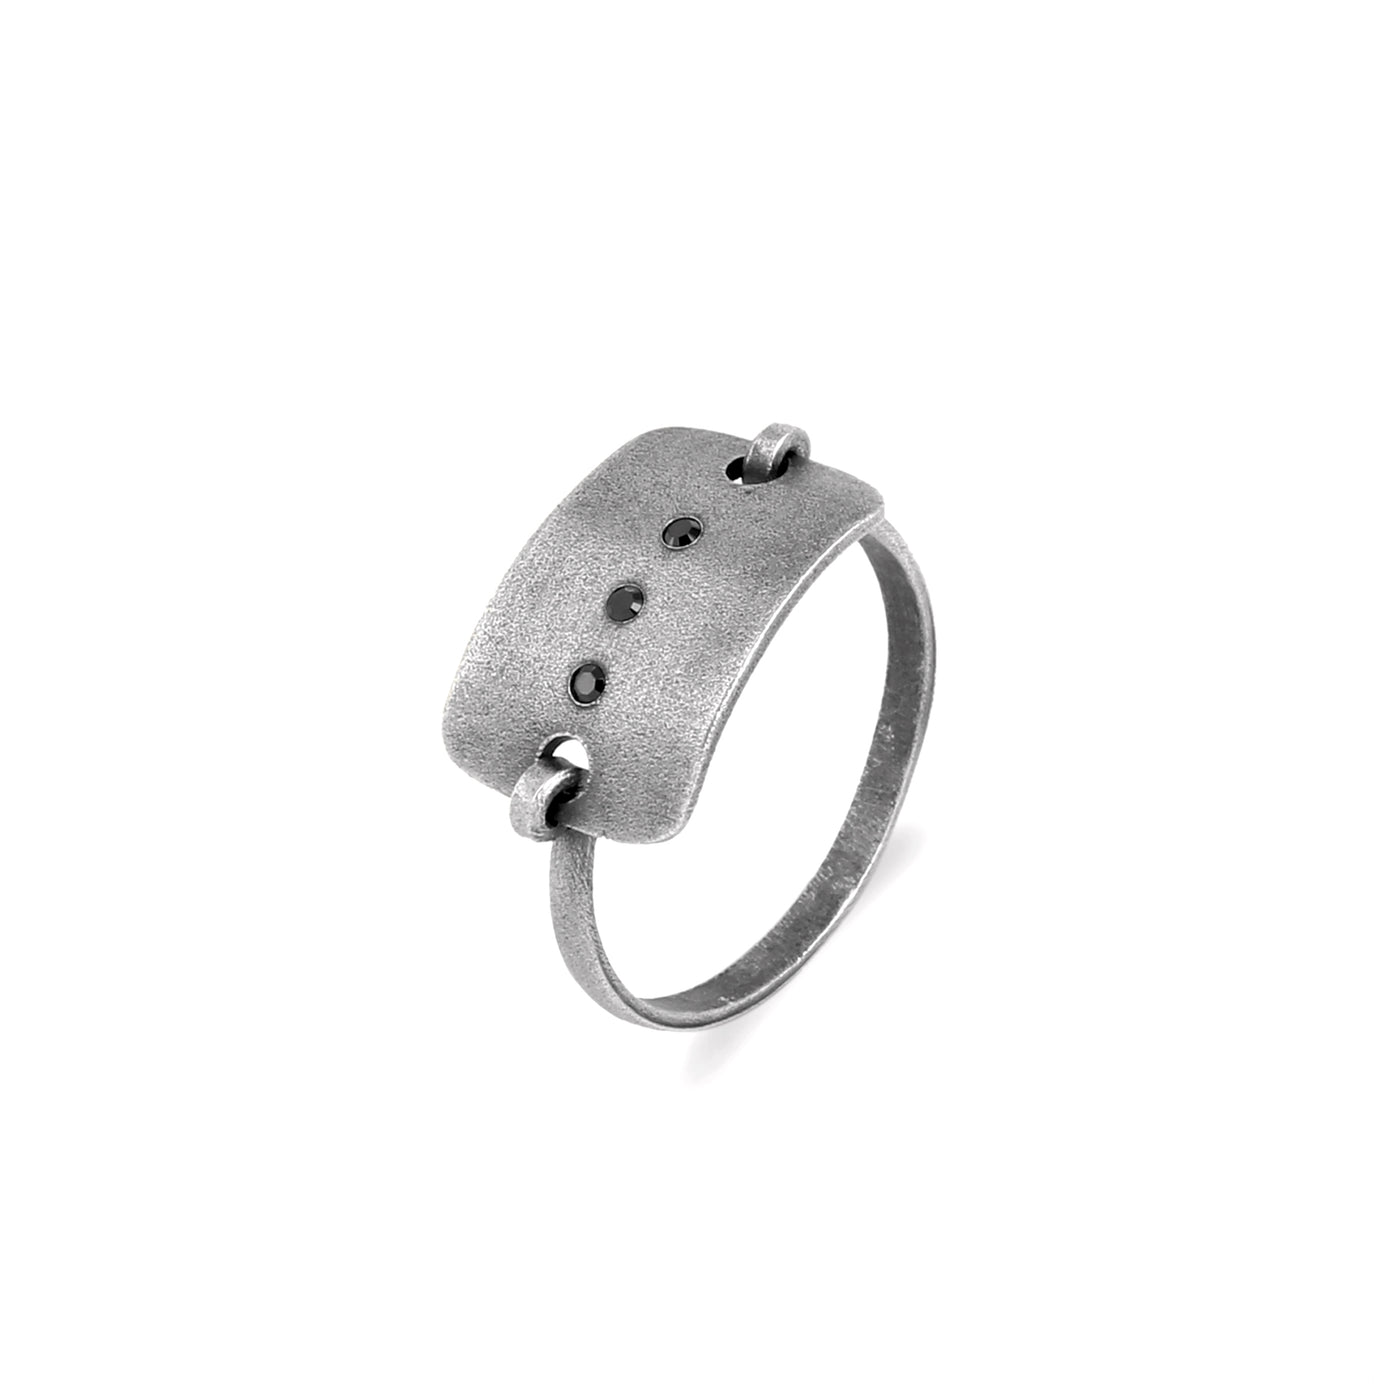 Orion handcrafted ring